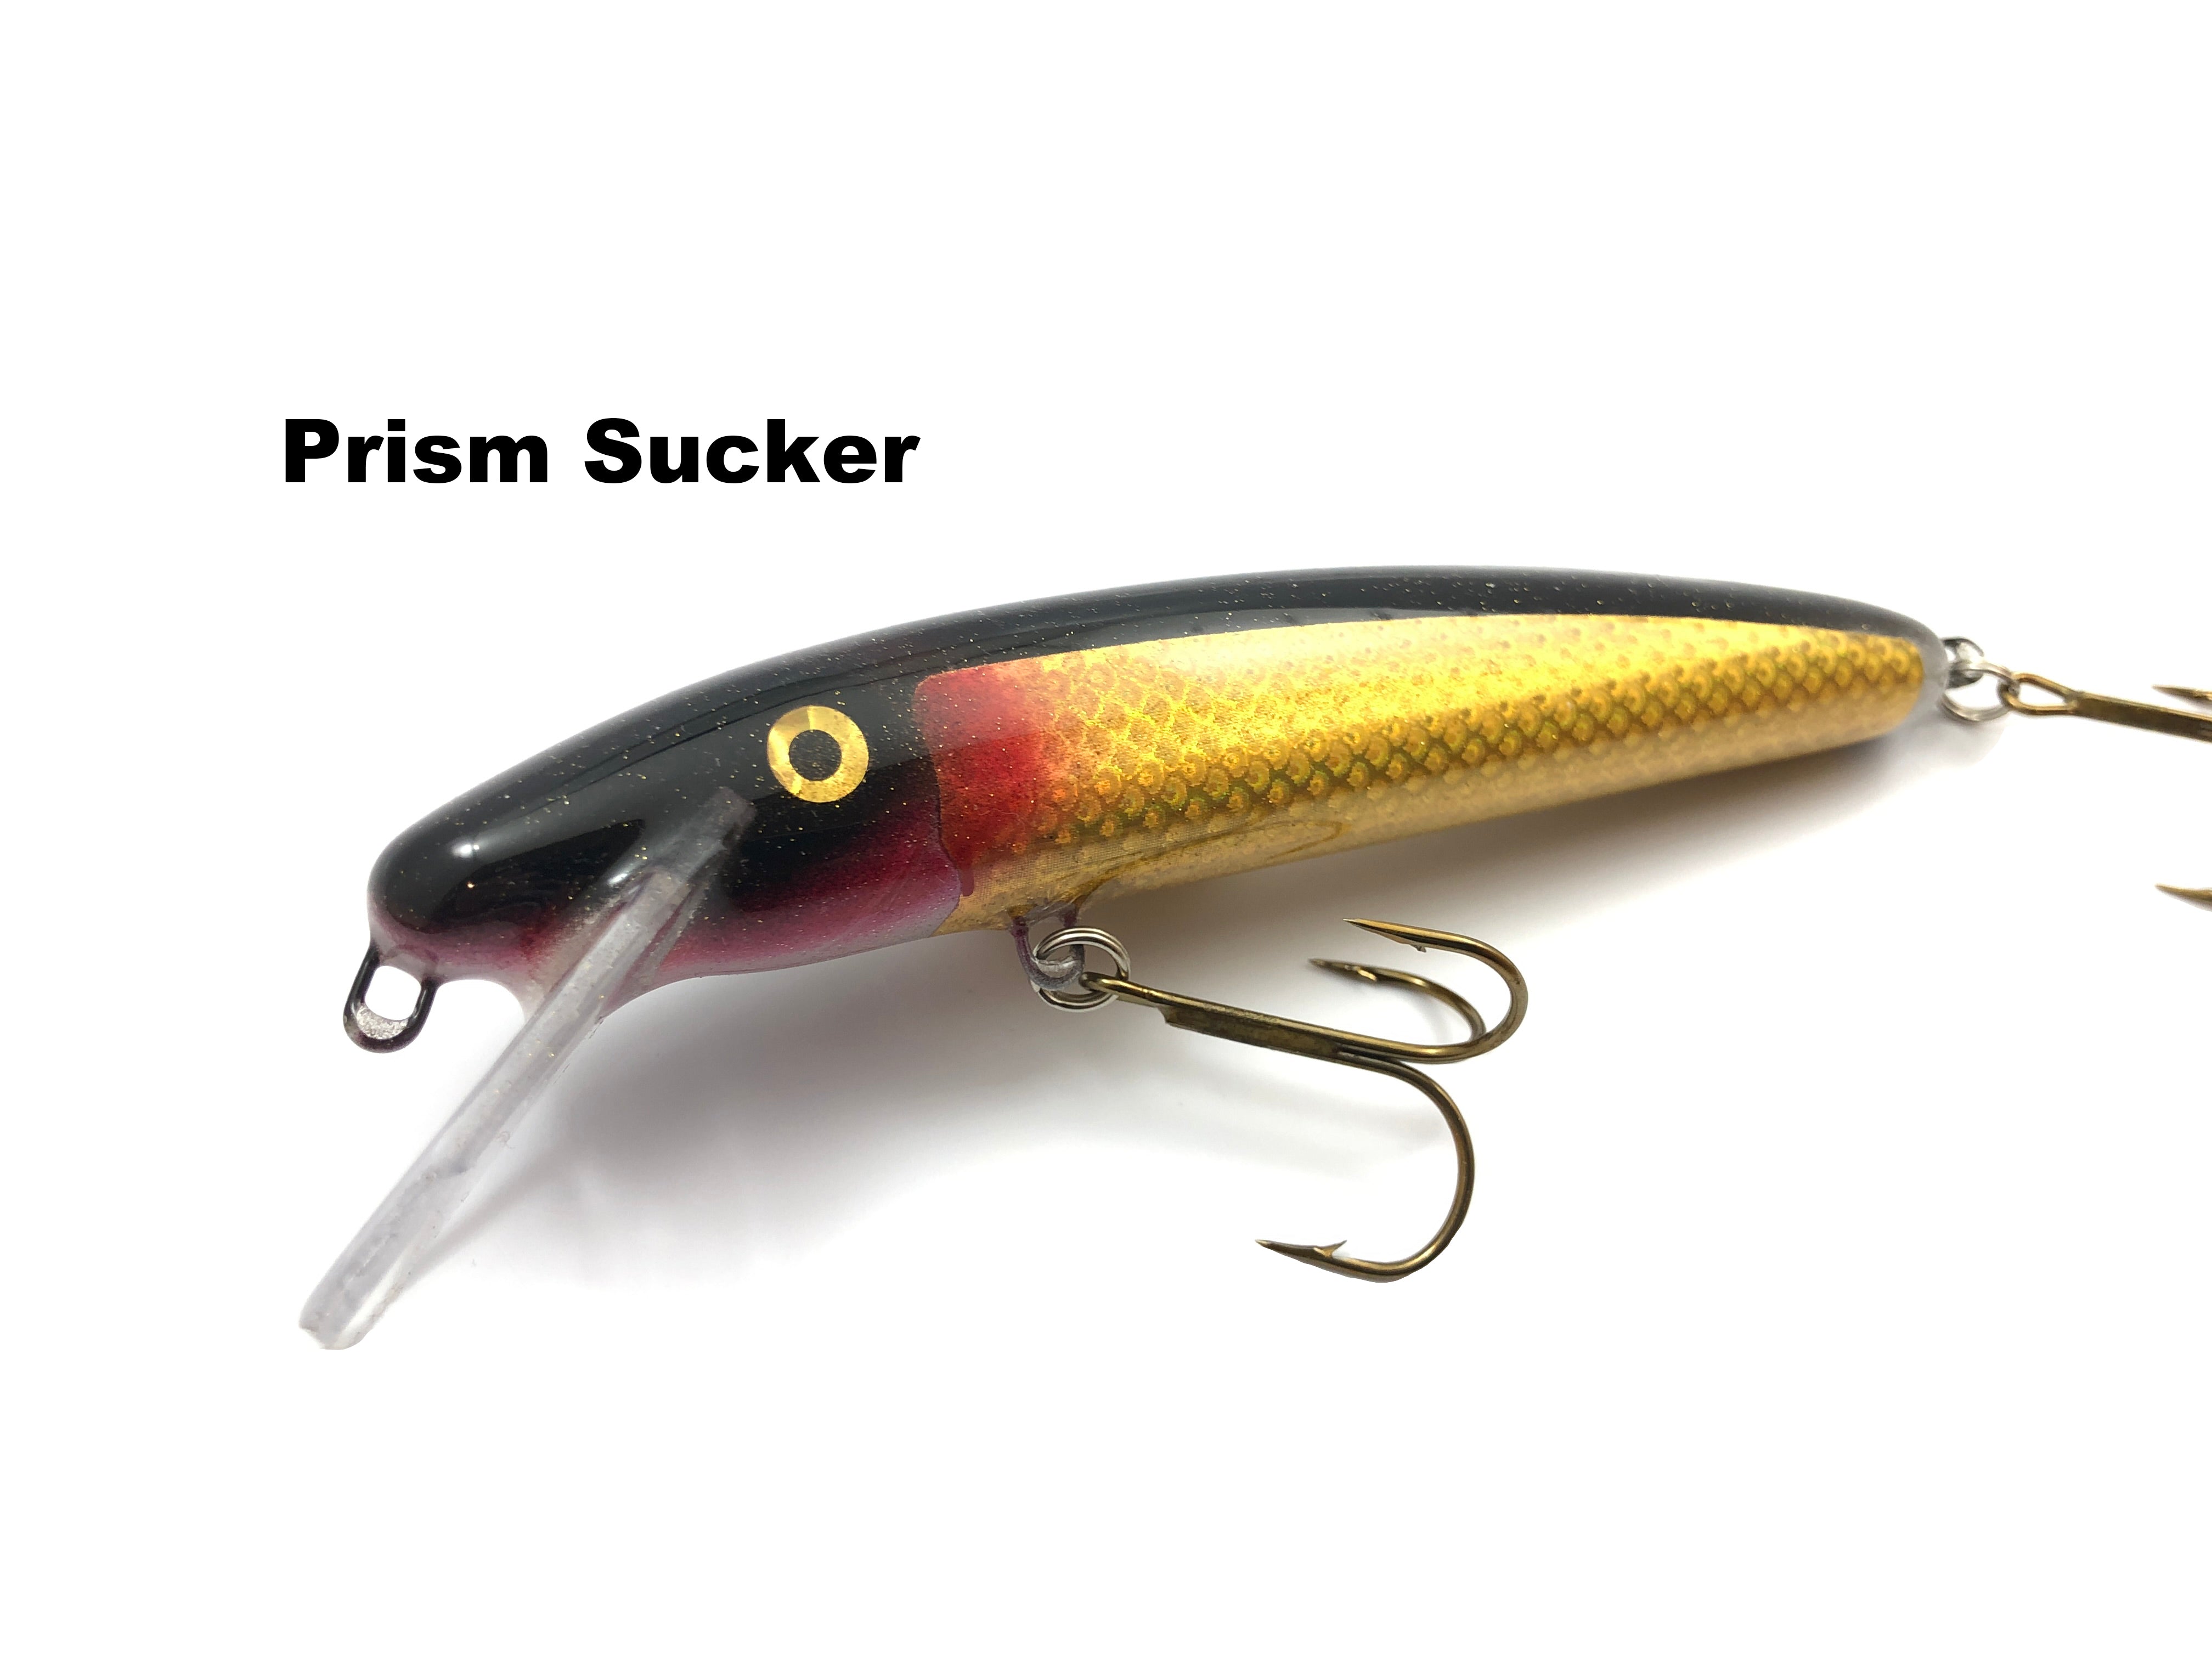 6.0 inch Custom Wooden Muskie Lure - Topwater Fire Minnow